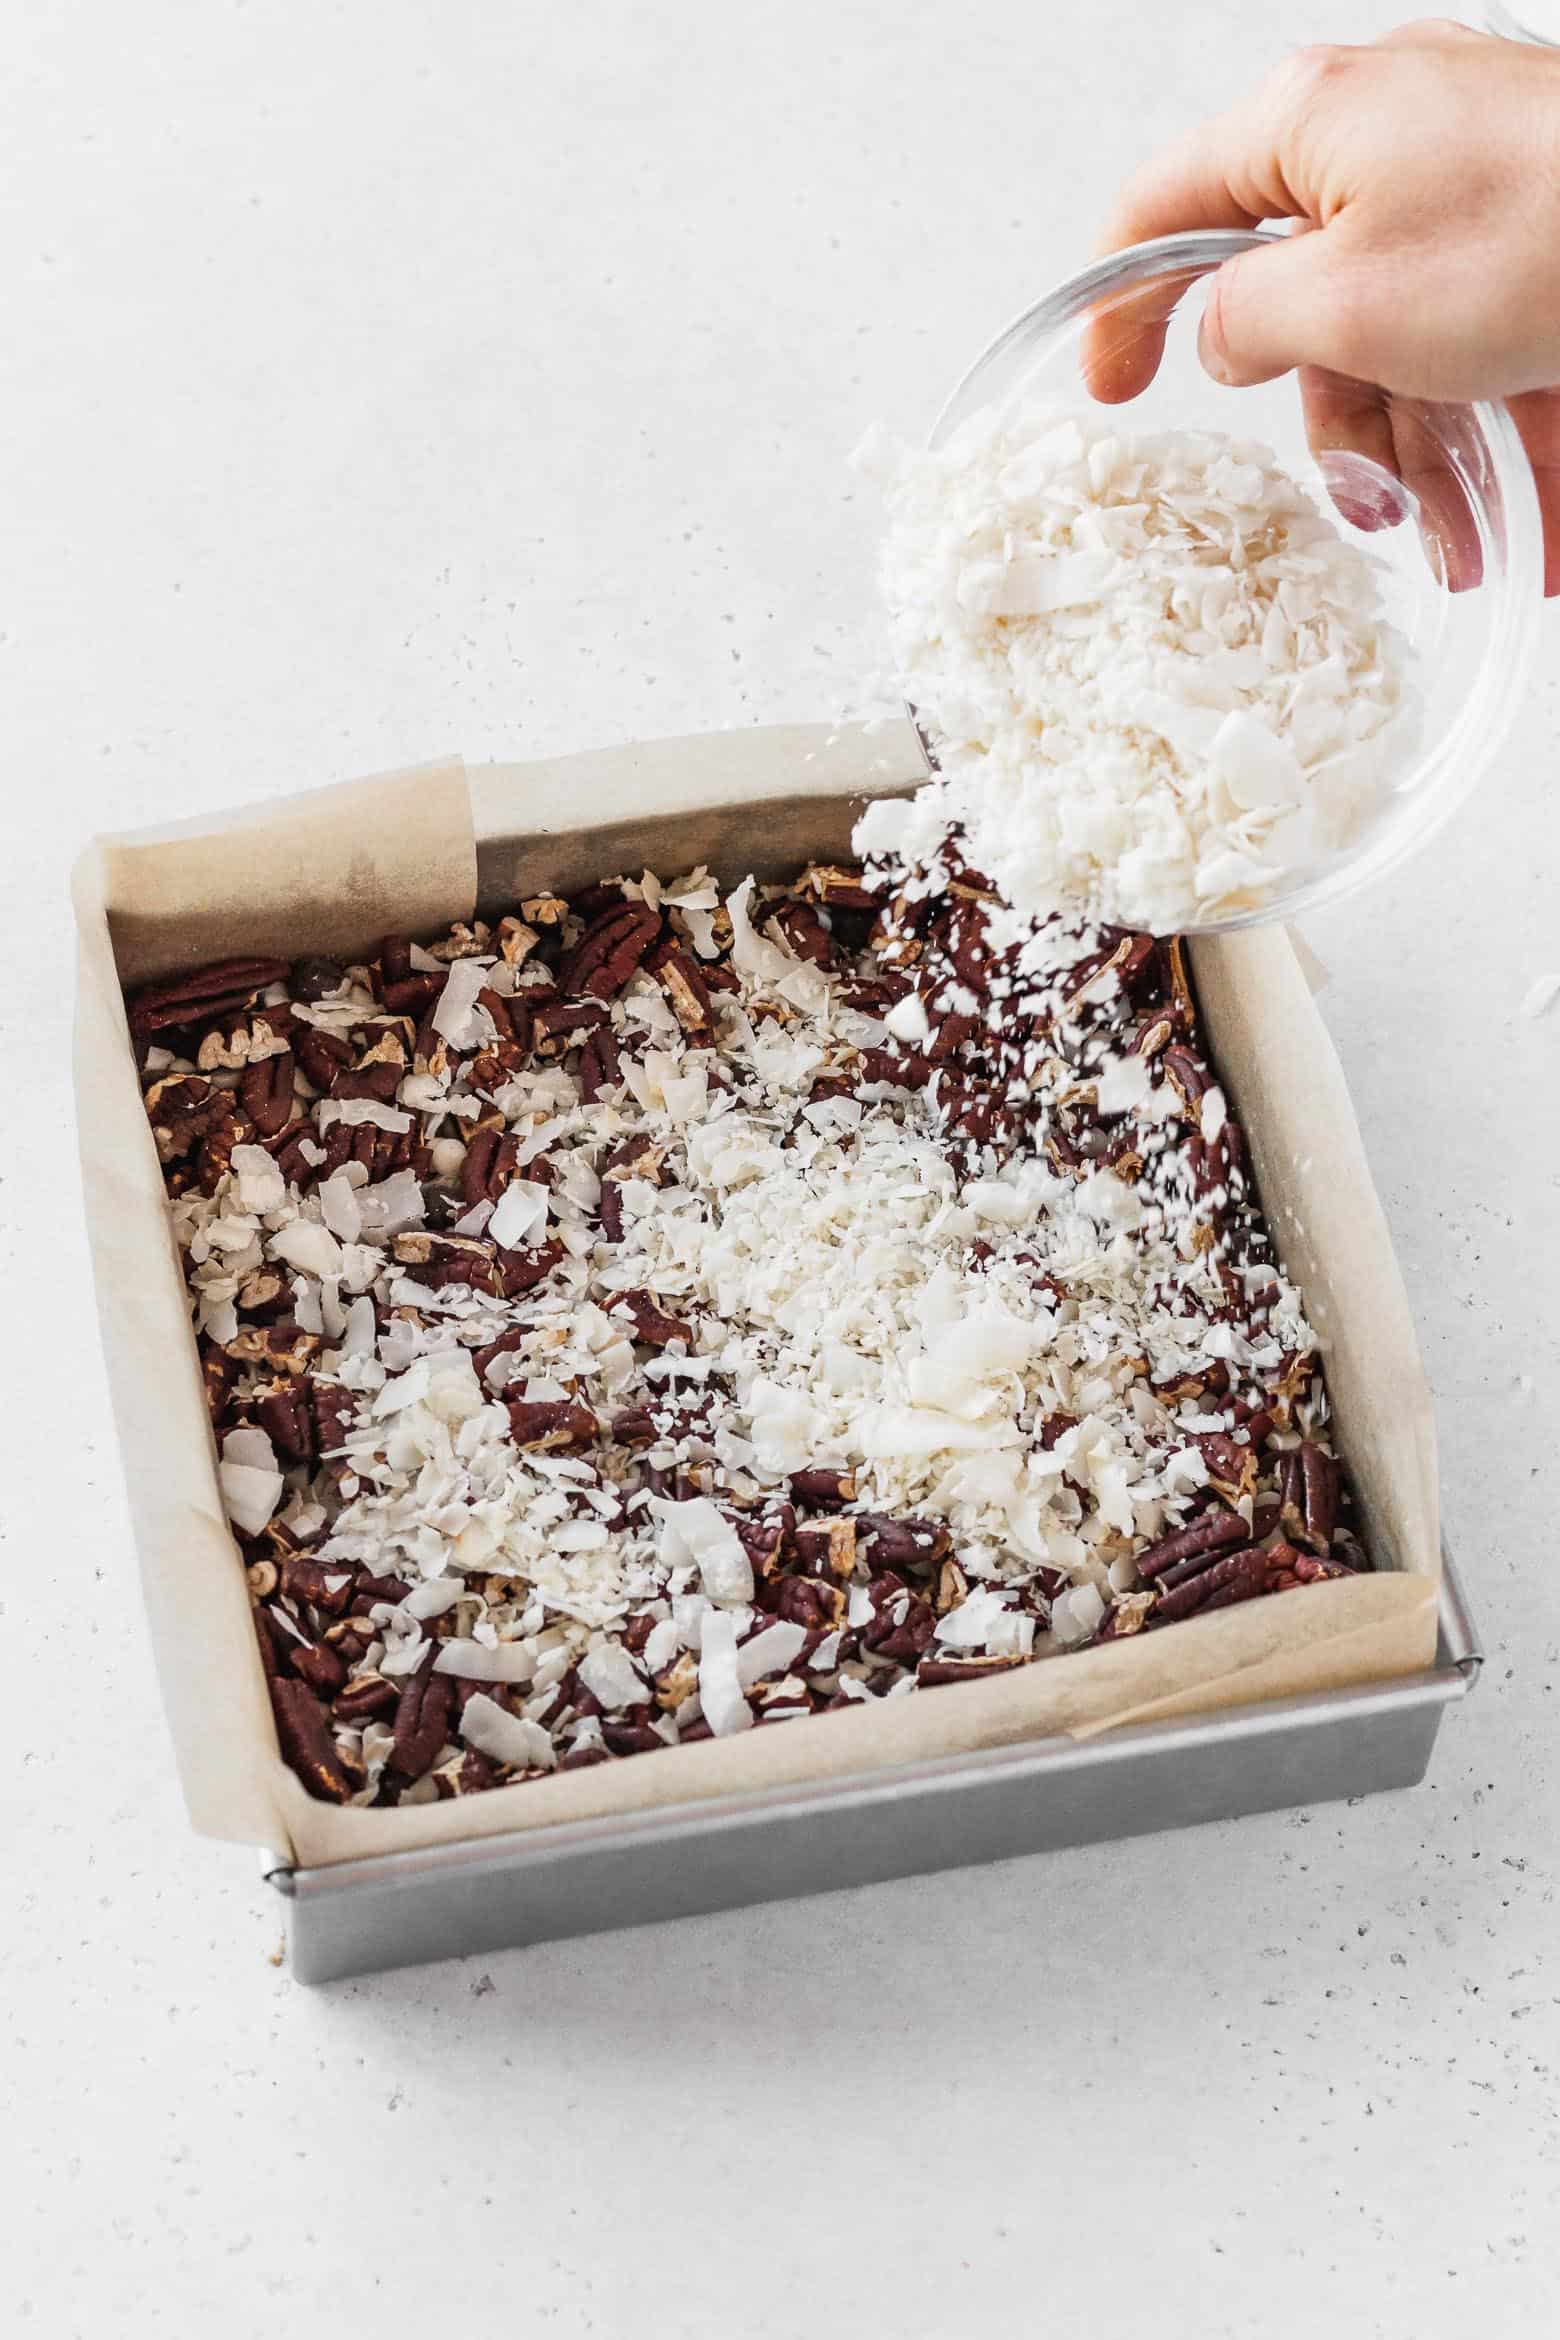 Sprinkling flaked coconut over the chopped pecans.